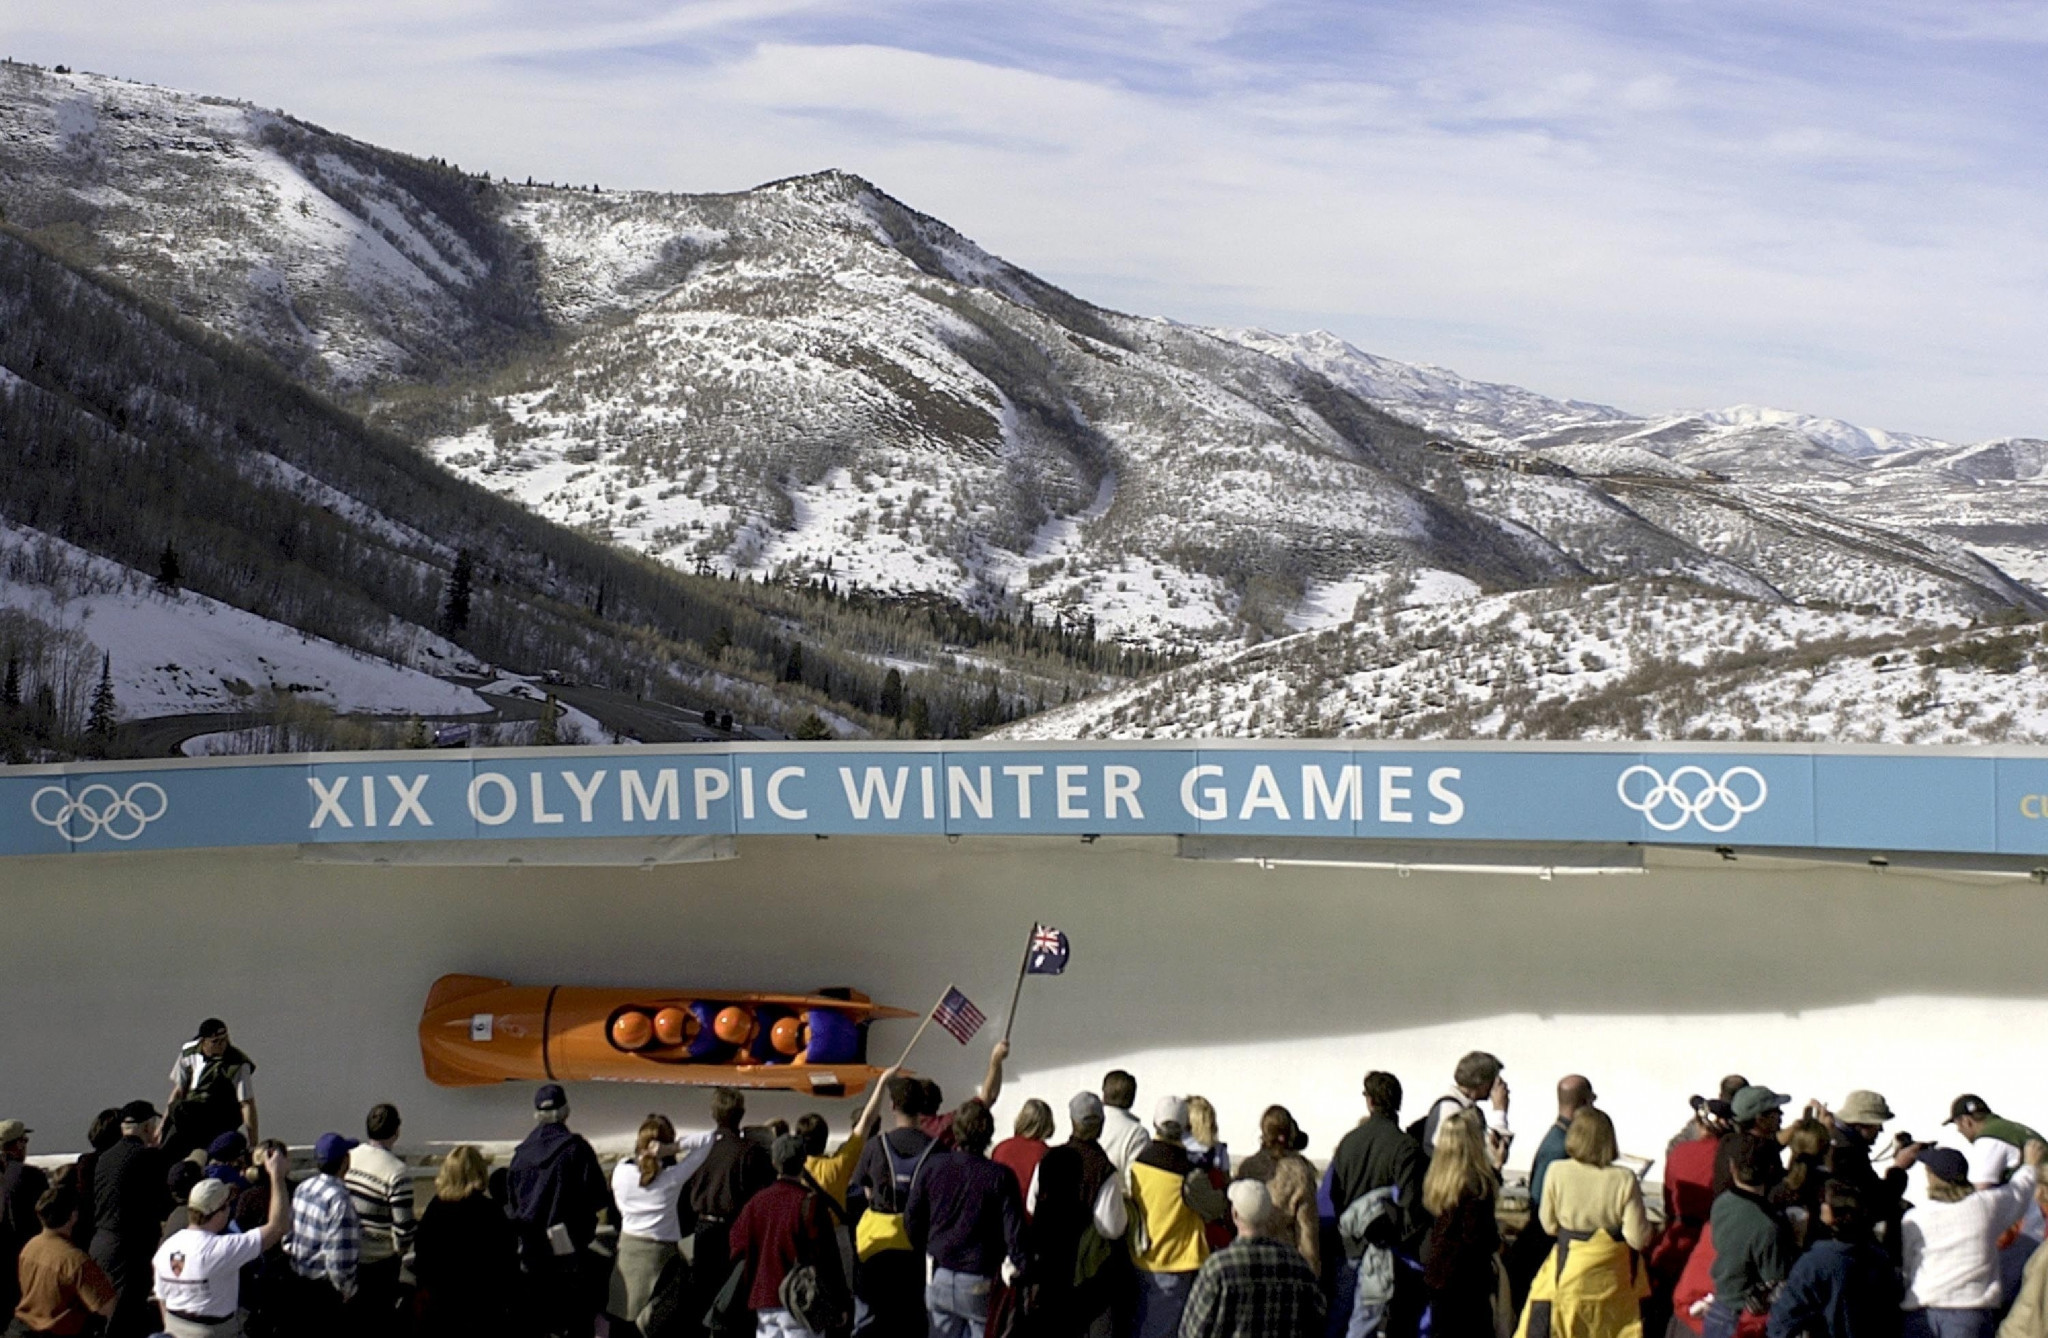 The opening Para Bobsleigh World Cup event of the season will start tomorrow at the Park City course that hosted competition during the 2002 Winter Games in Salt Lake City ©Getty Images  